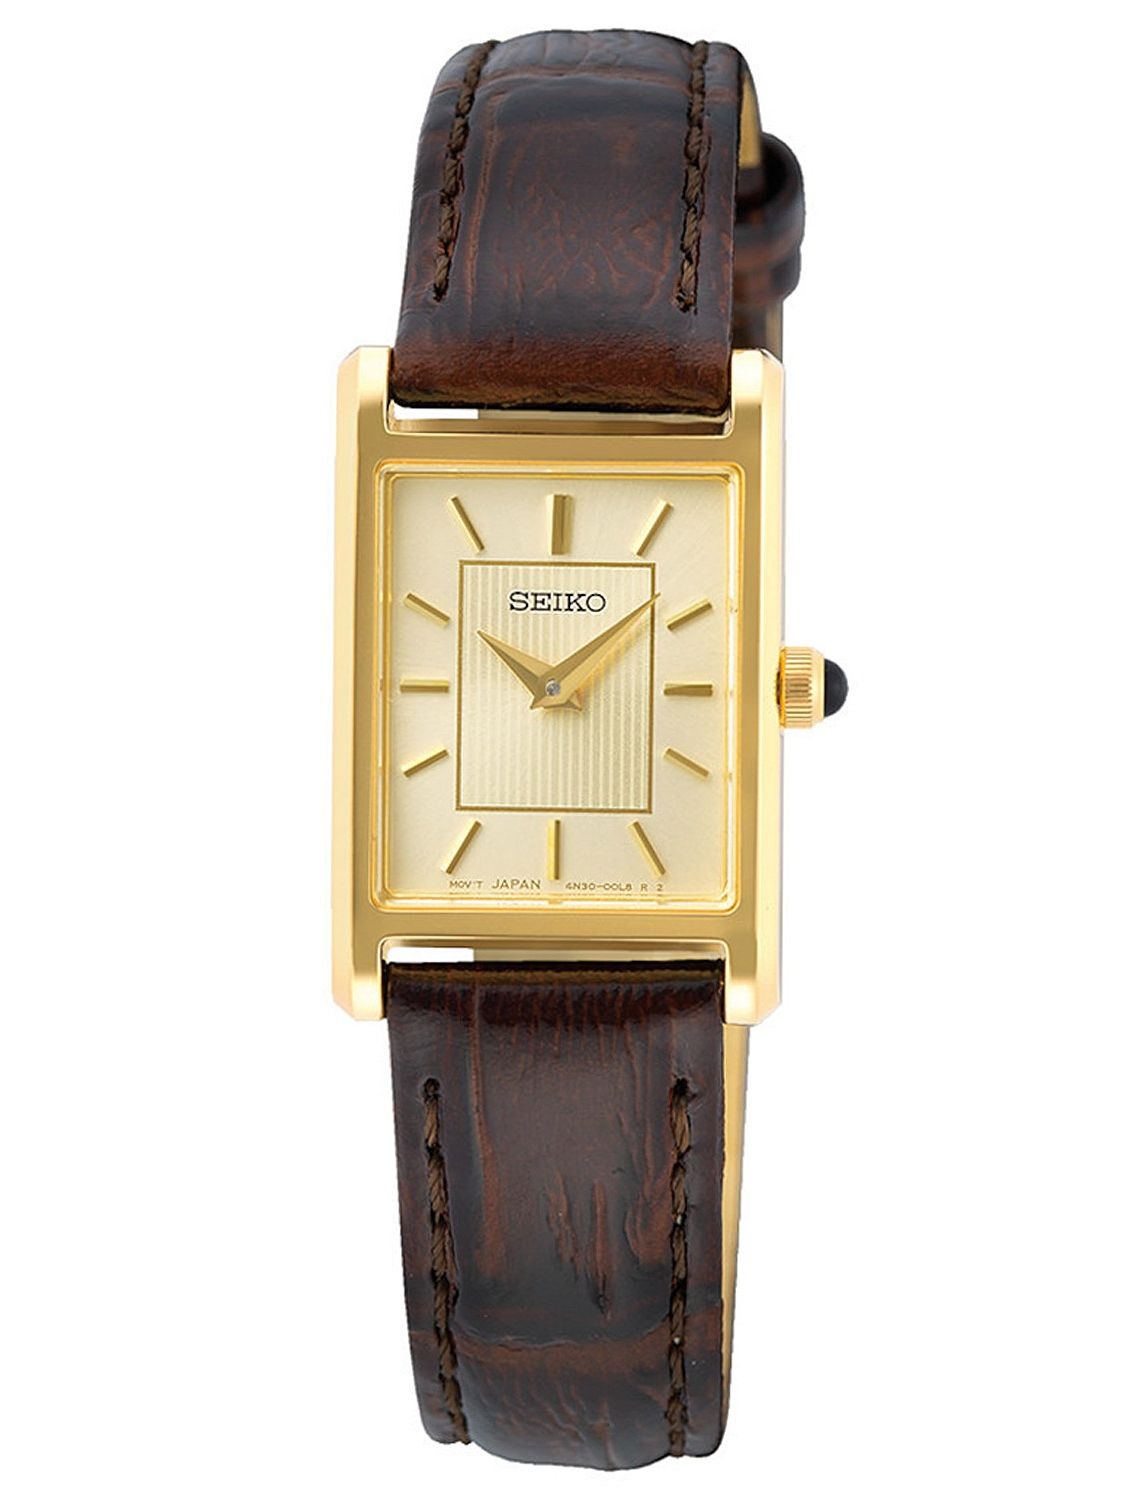 SEIKO SWR066P1 Ladies' Watch with Brown Leather Strap